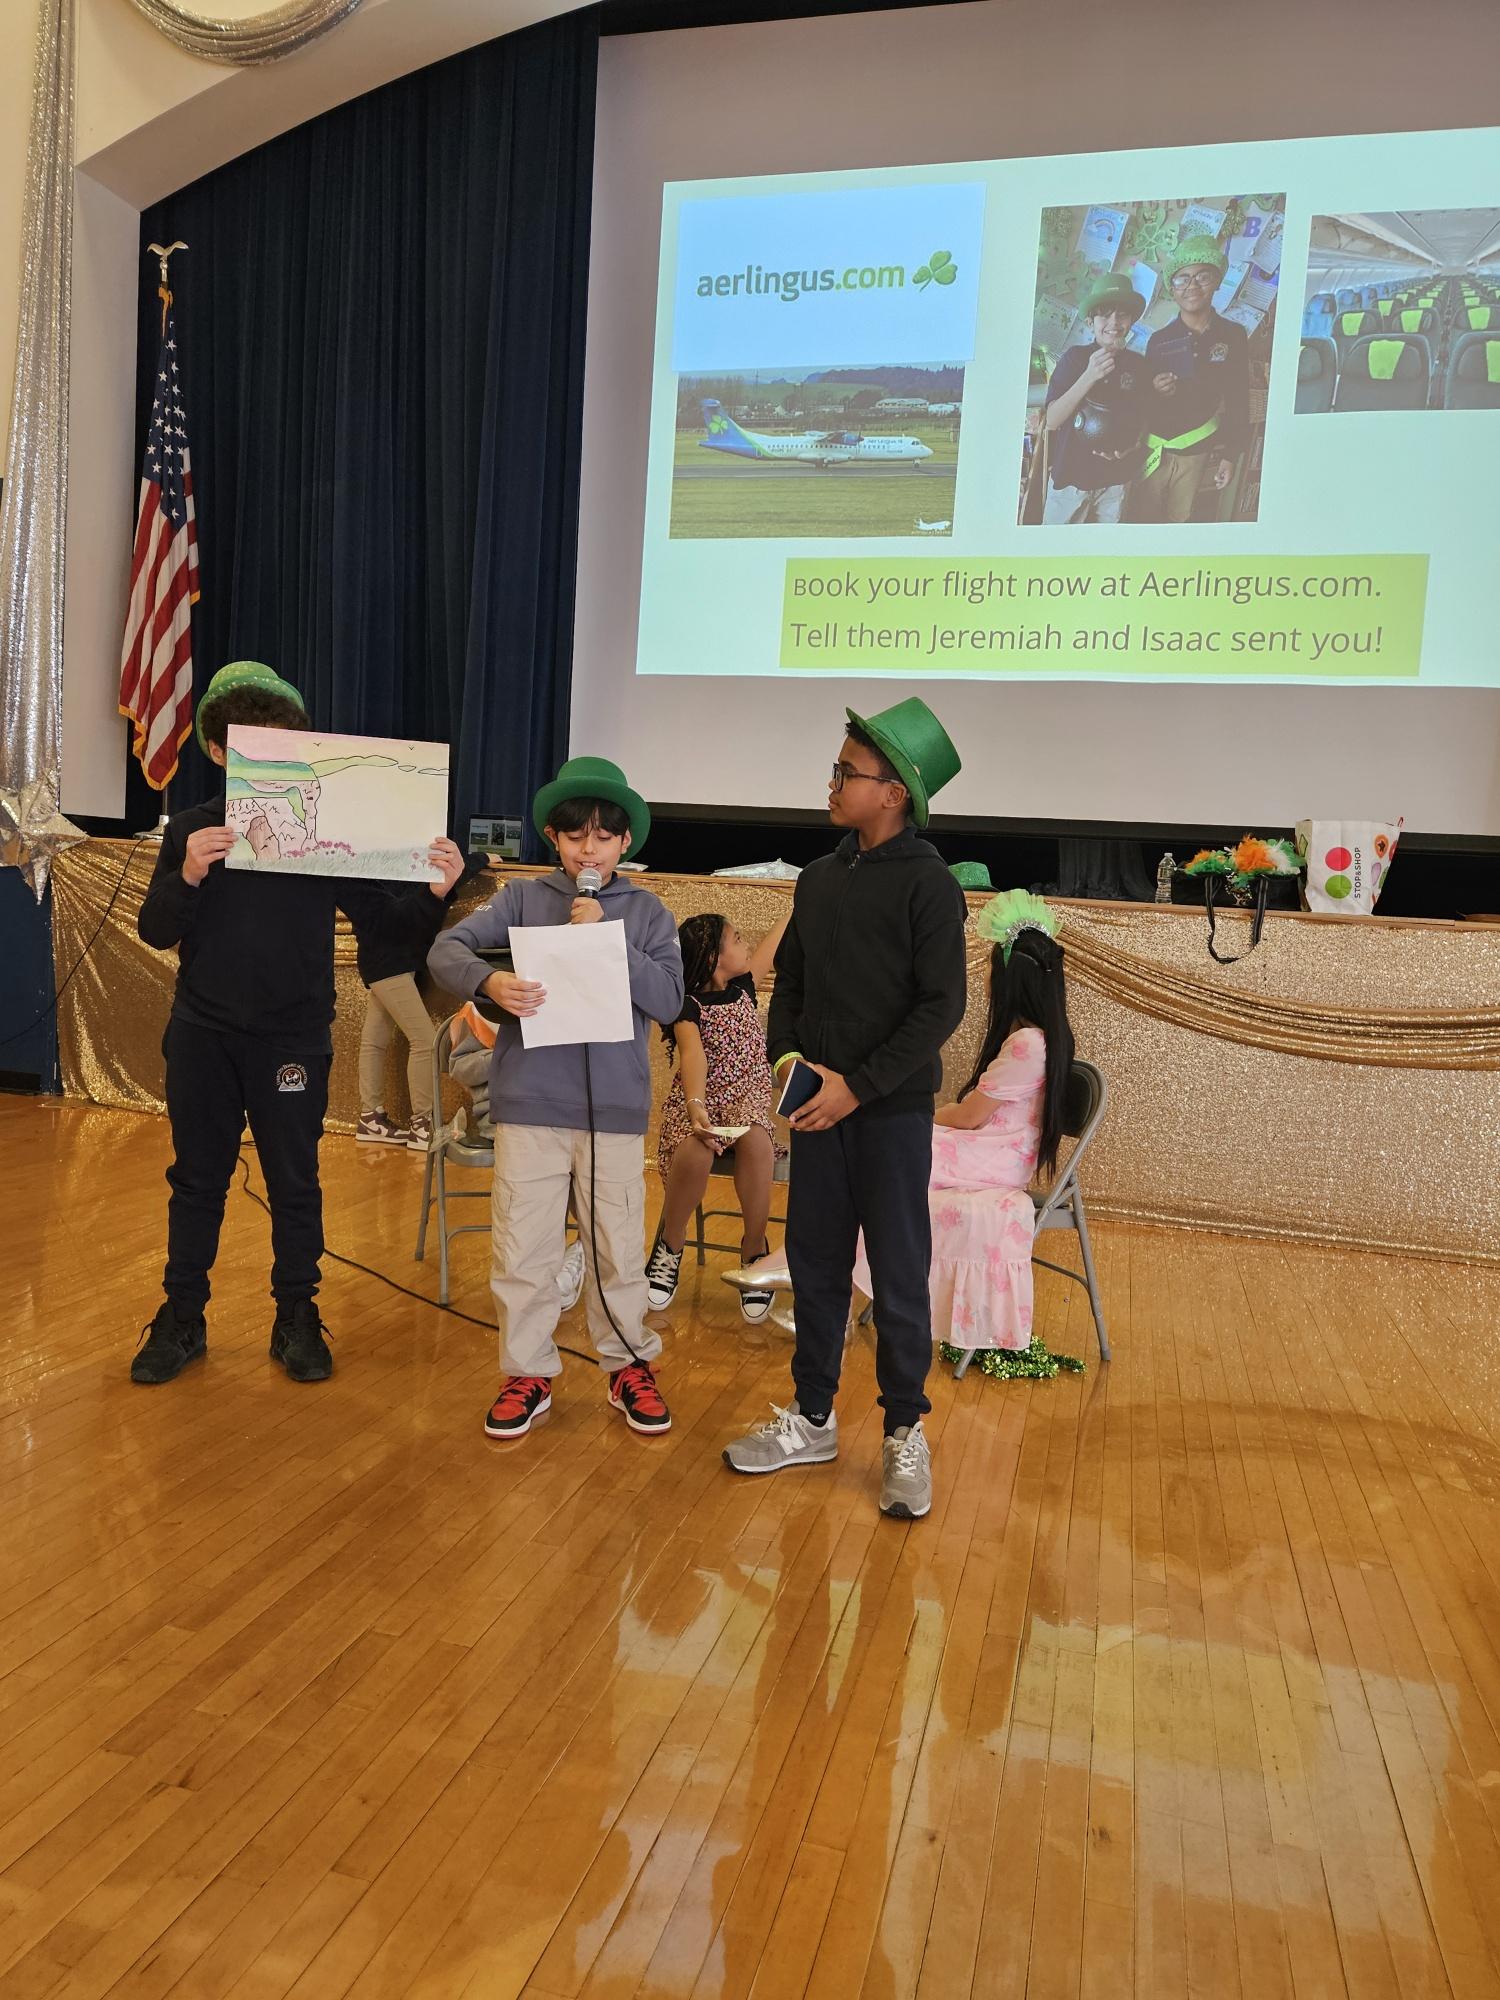 Celebrating Saint Patrick's Day at the Colin Powell School